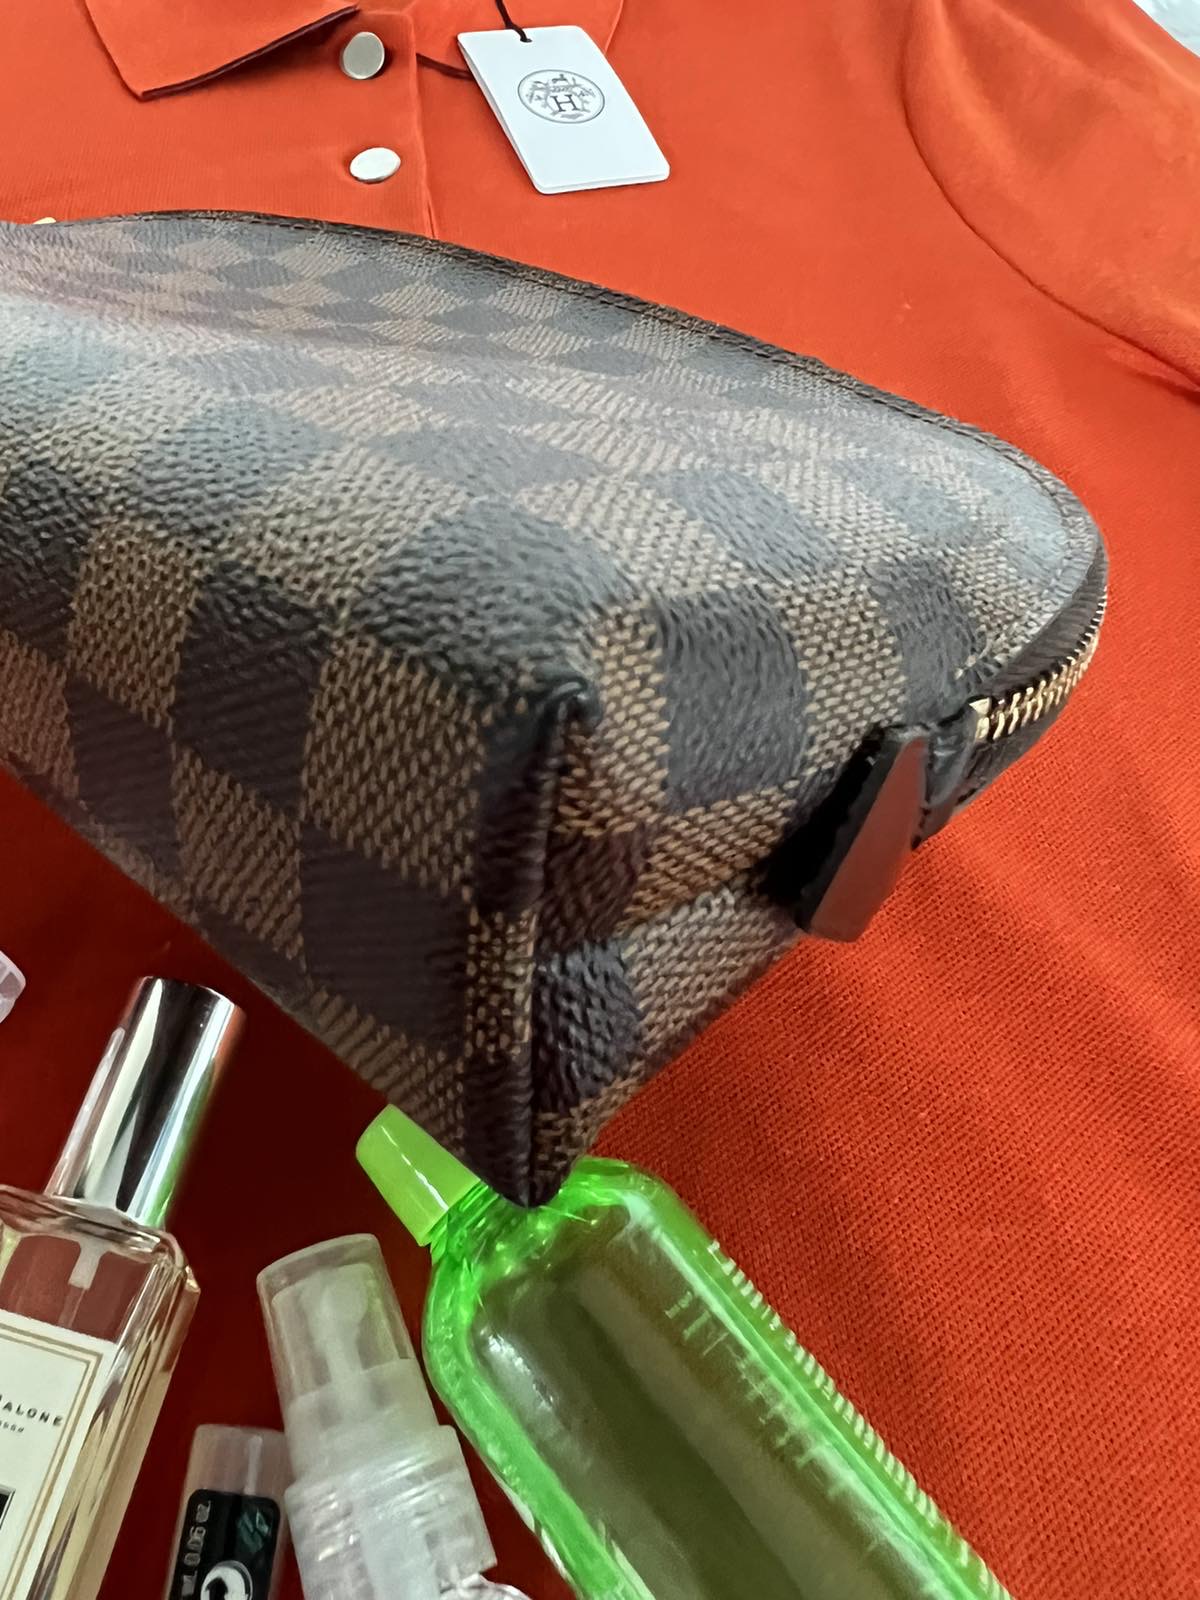 Louis Vuitton Damier Ebene Cosmetic Pouch PM. DC: CA0035. Made in Spain.  With dustbag & certificate of authenticity from ENTRUPY ❤️ - Canon E-Bags  Prime